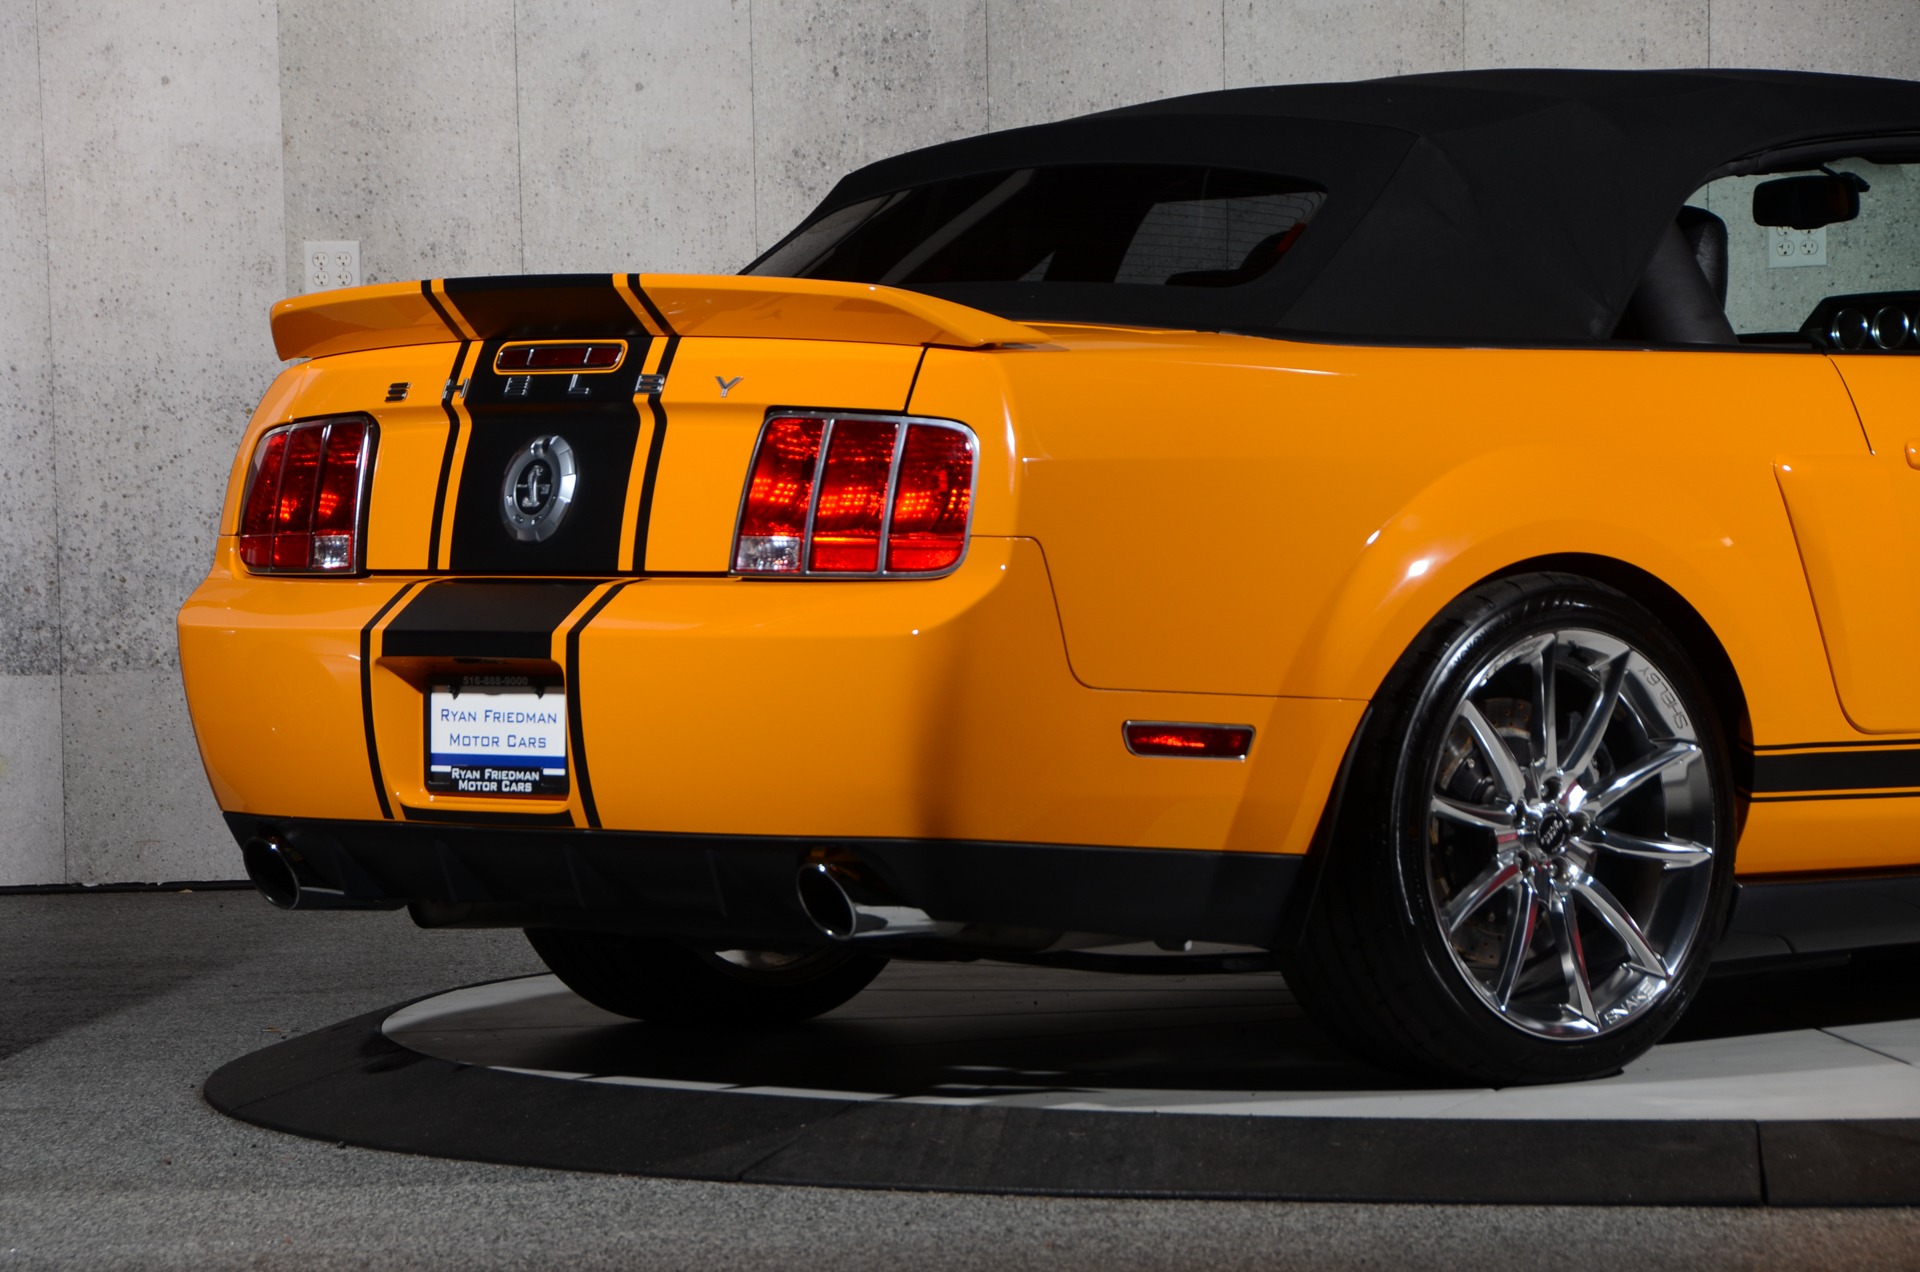 Used 2007 Ford Shelby GT500 SUPER SNAKE For Sale ($69,995) | Ryan 